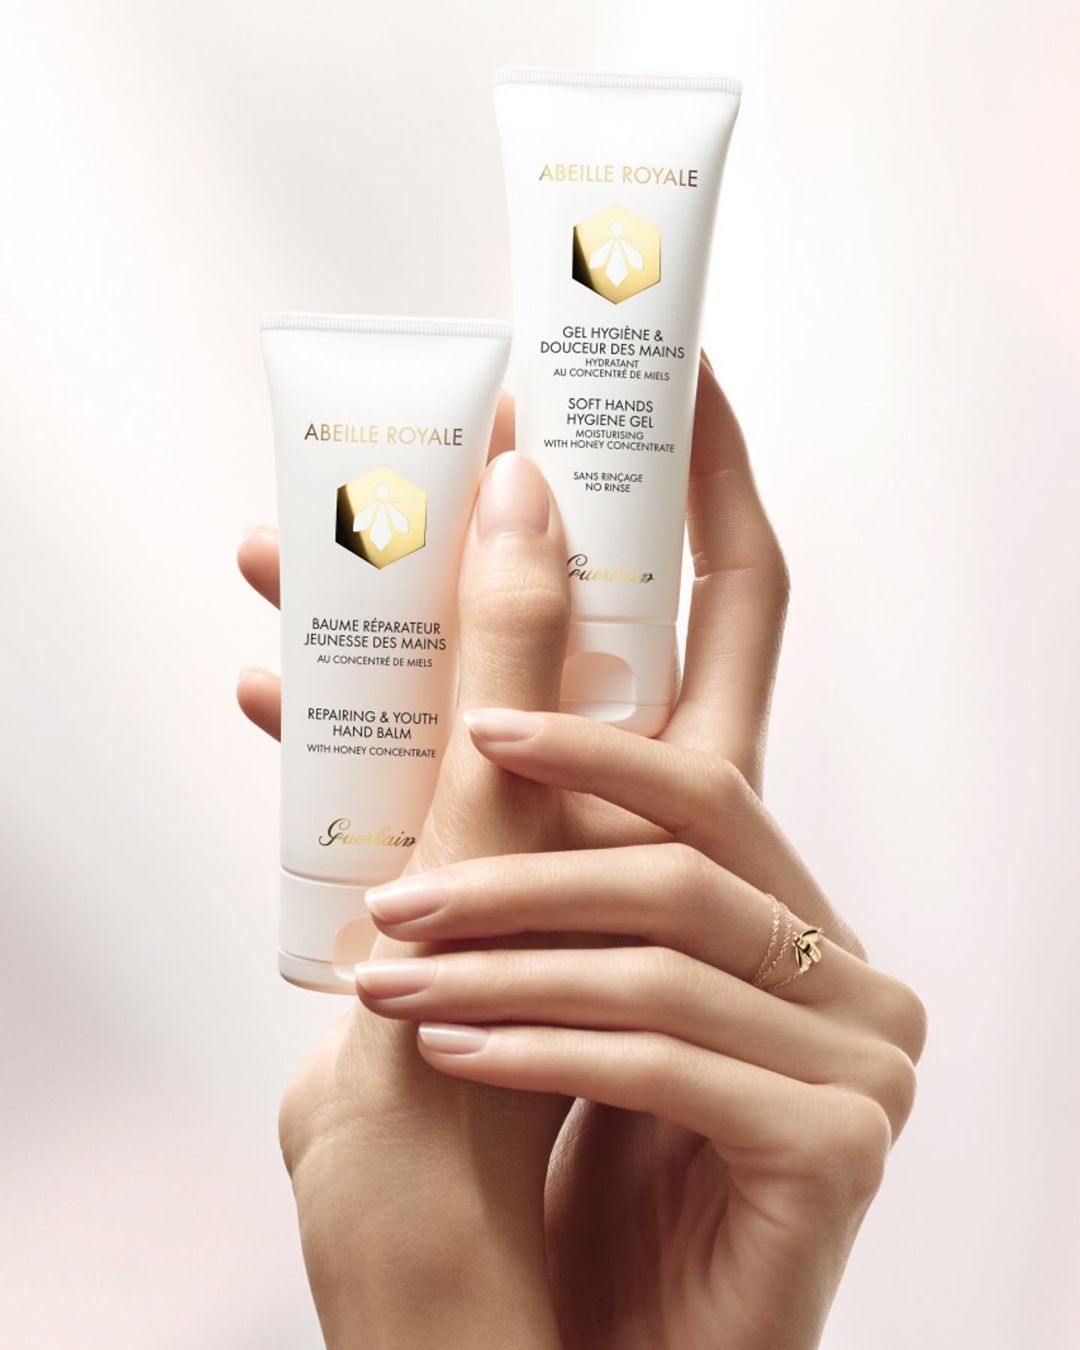 Guerlain - Introducing the new hands ritual.

Abeille Royale Hands Ritual.
A two-step treatment with honey concentrate.

Soft Hands Hygiene Gel cleans and protects, while Repairing & Youth Hand Balm s...